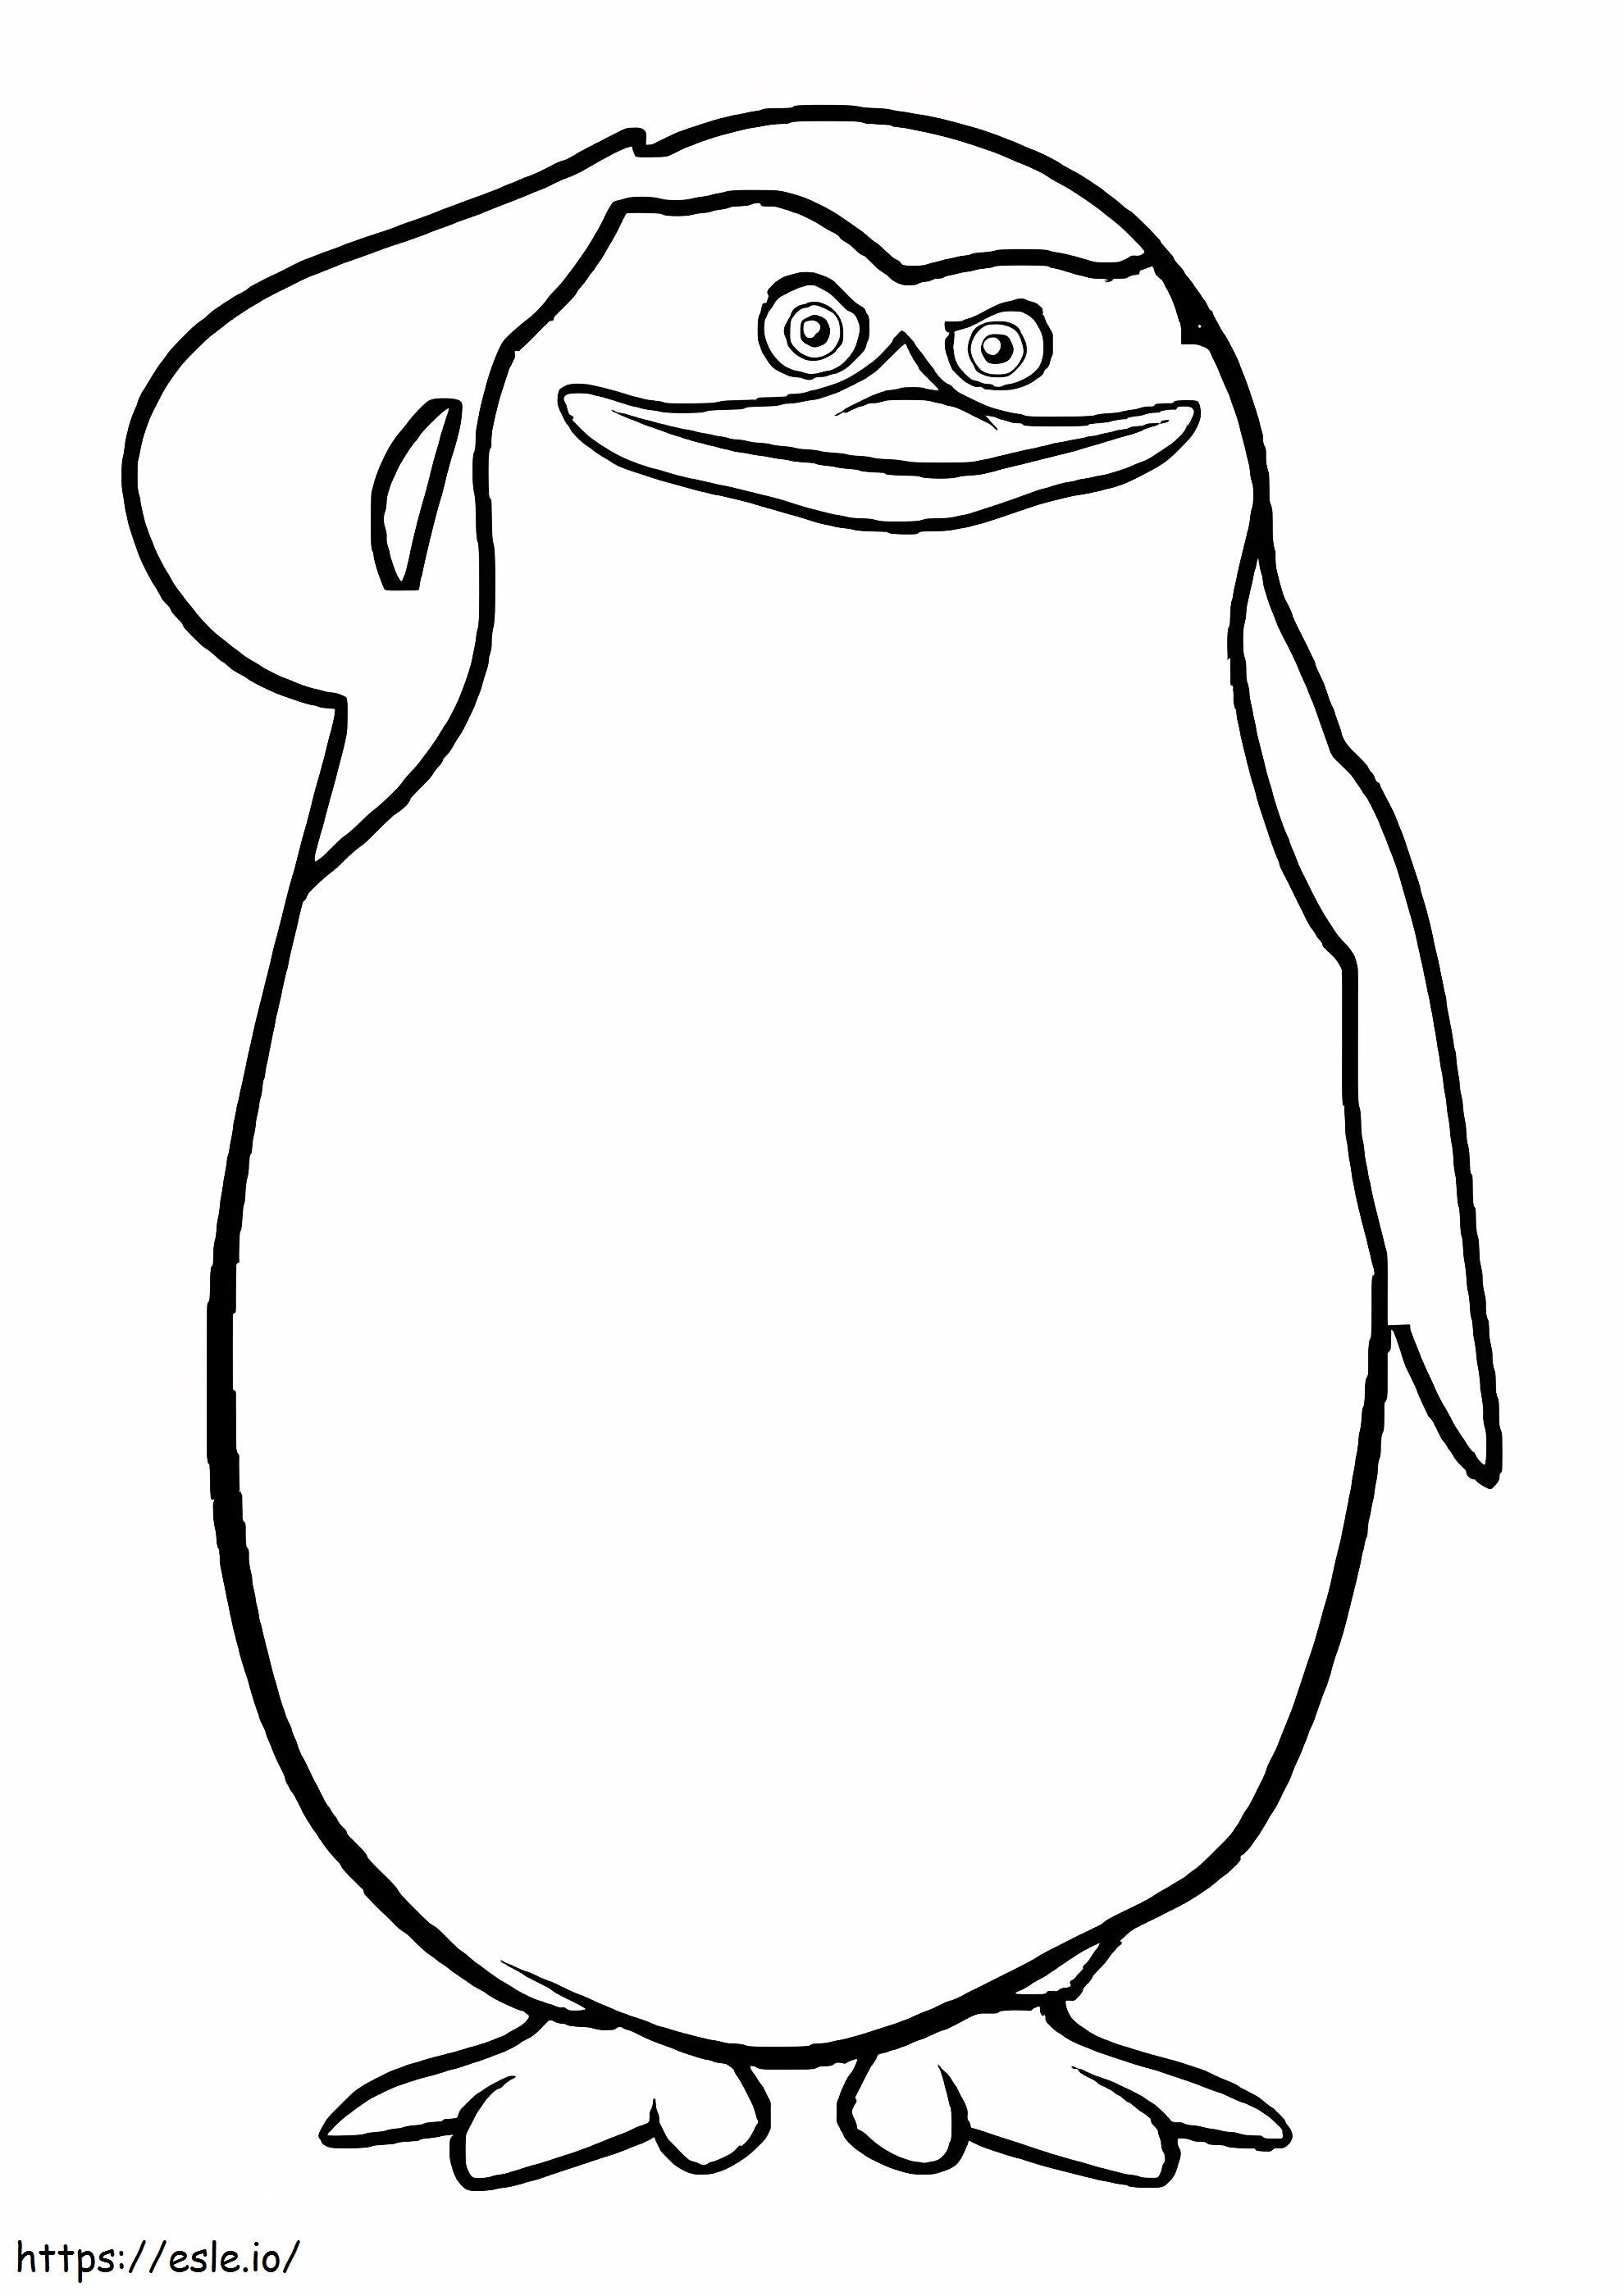 Penguin Private coloring page